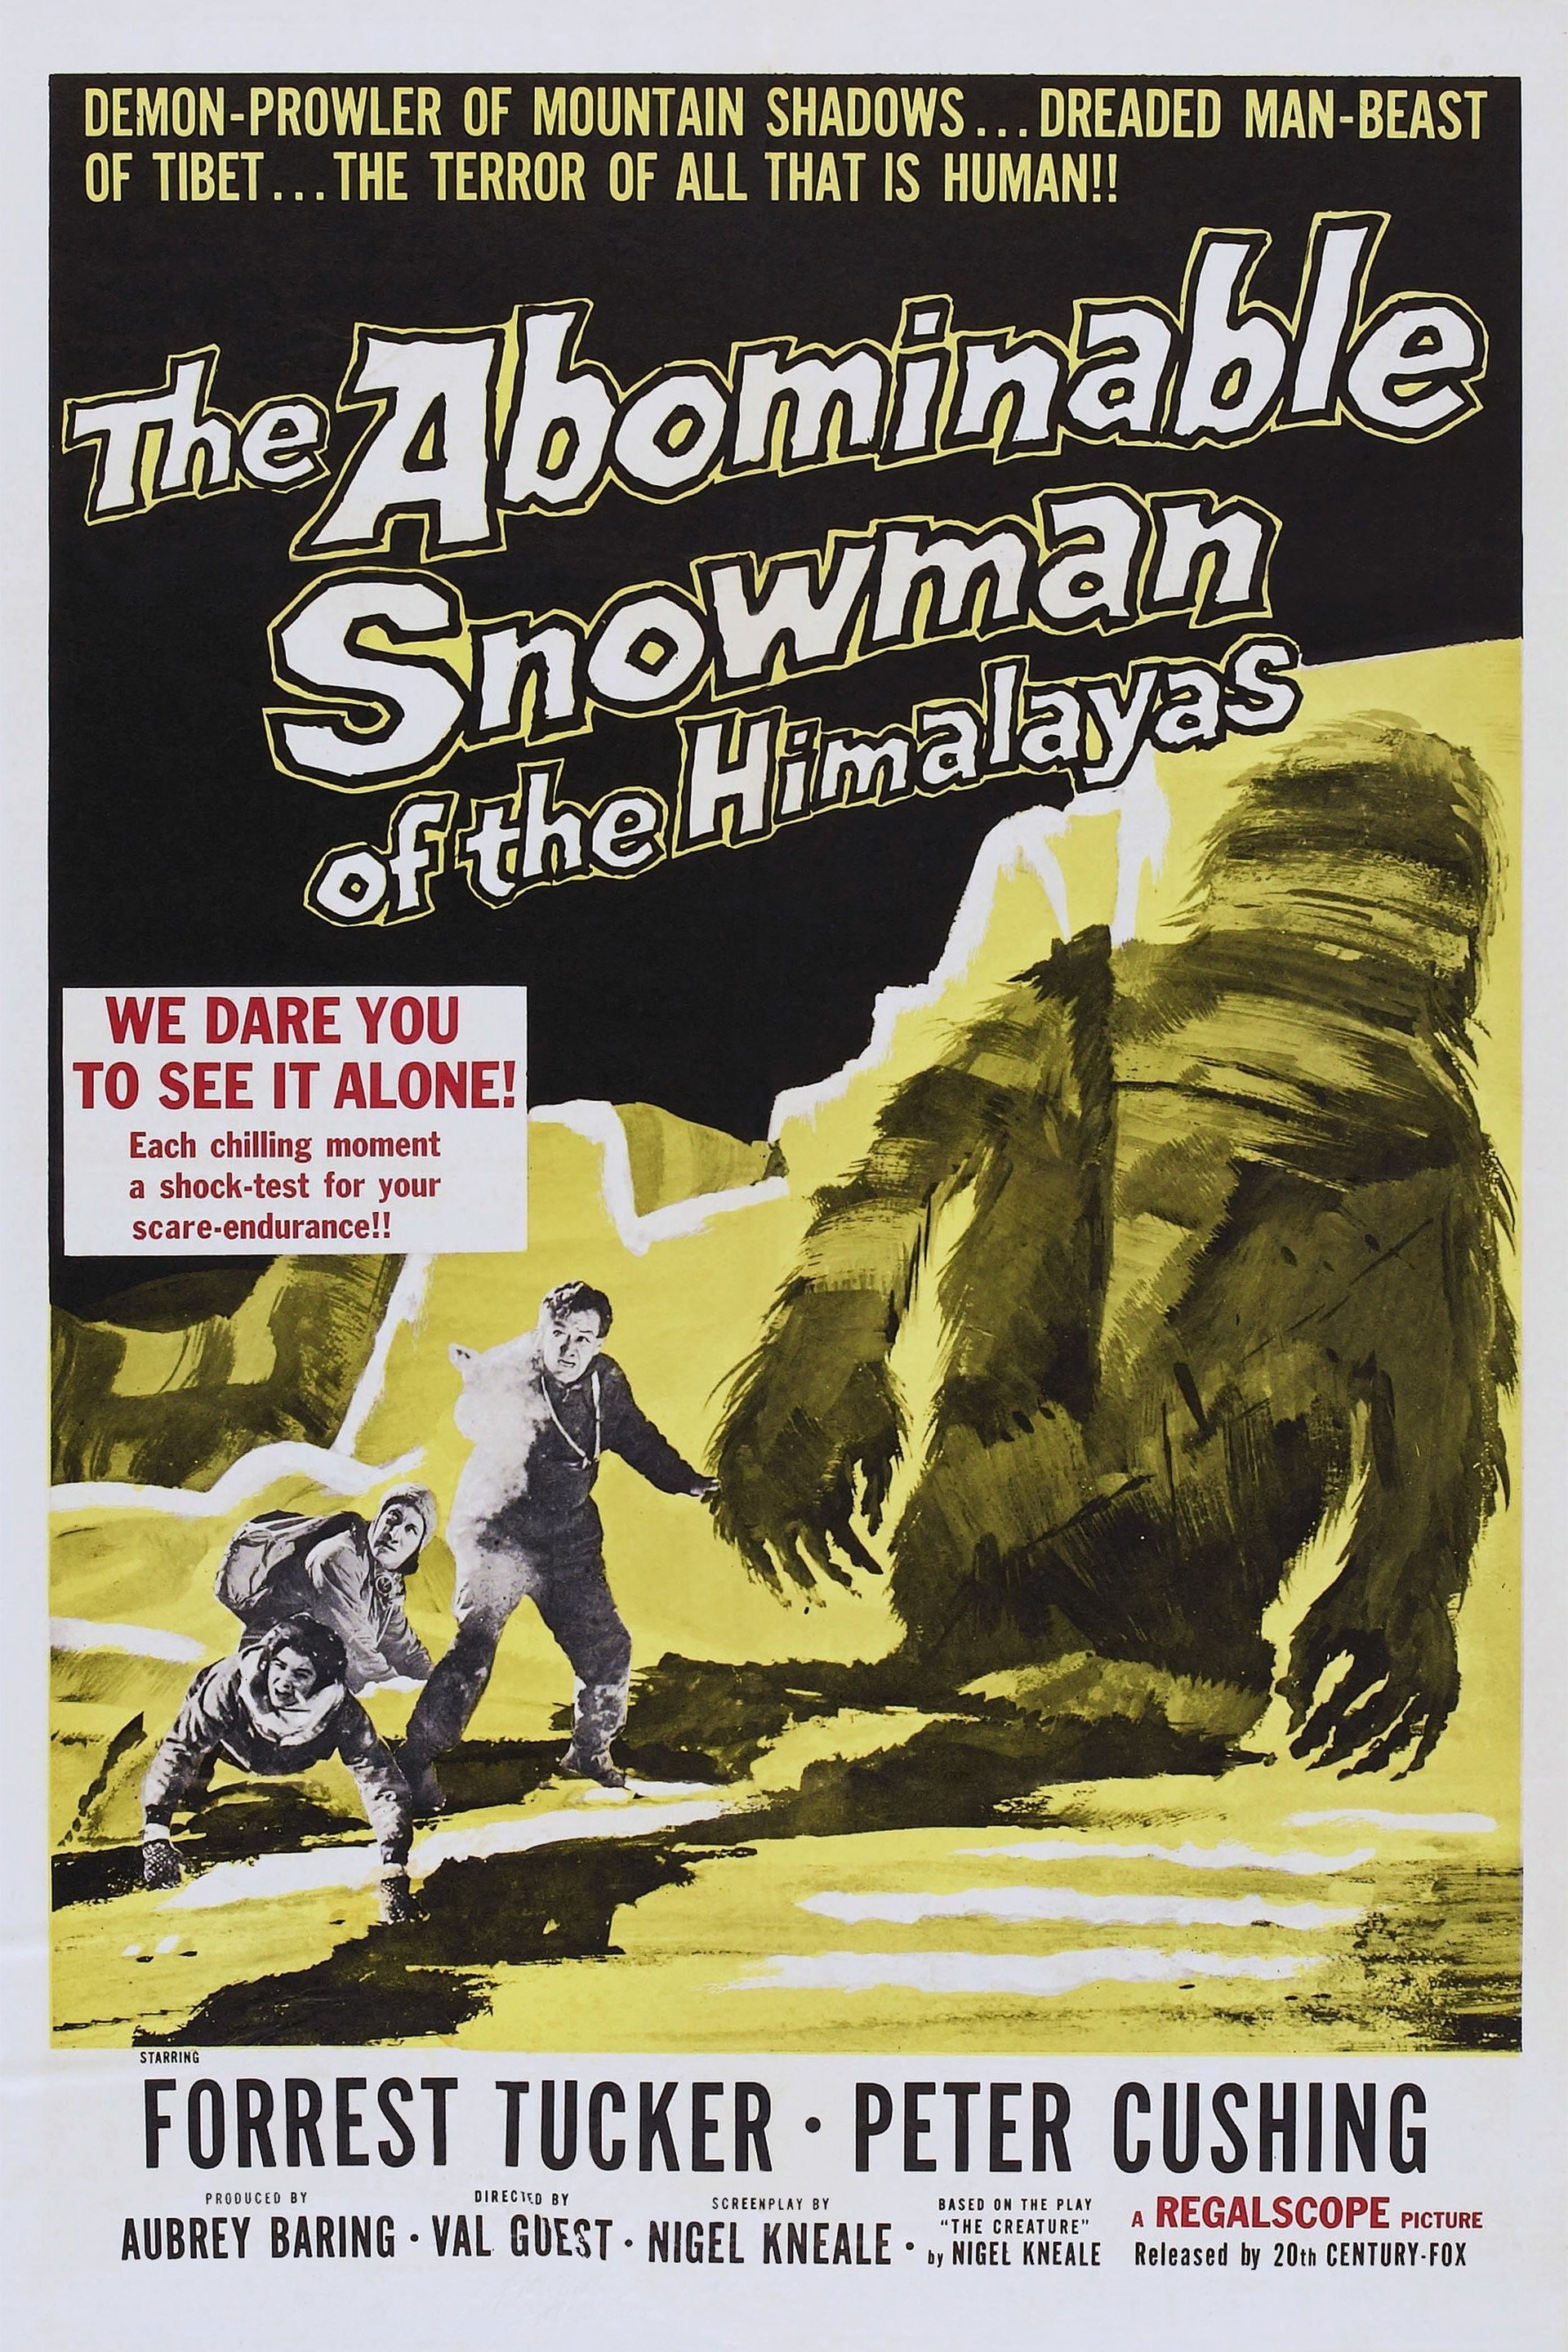 The Abominable Snowman of the Himalayas | Rotten Tomatoes